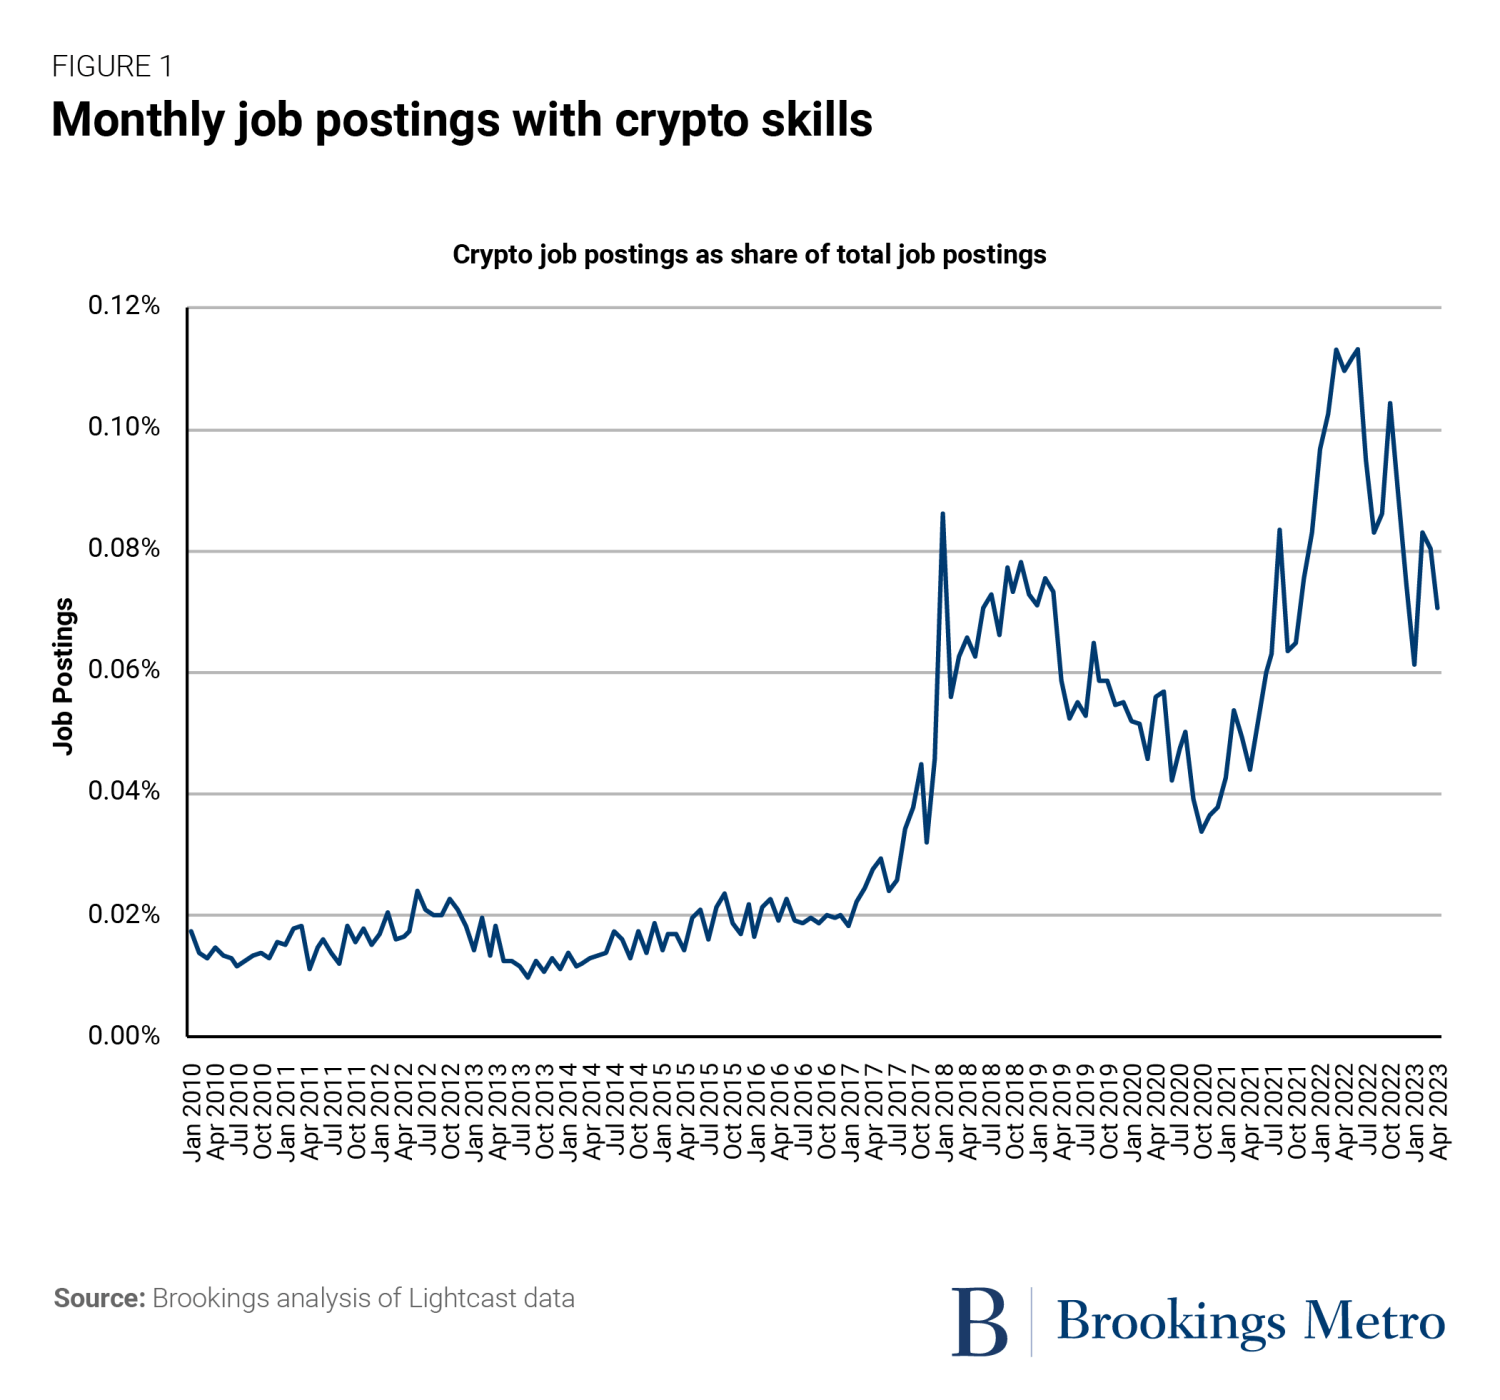 Figure 1: Monthly job postings with crypto skills